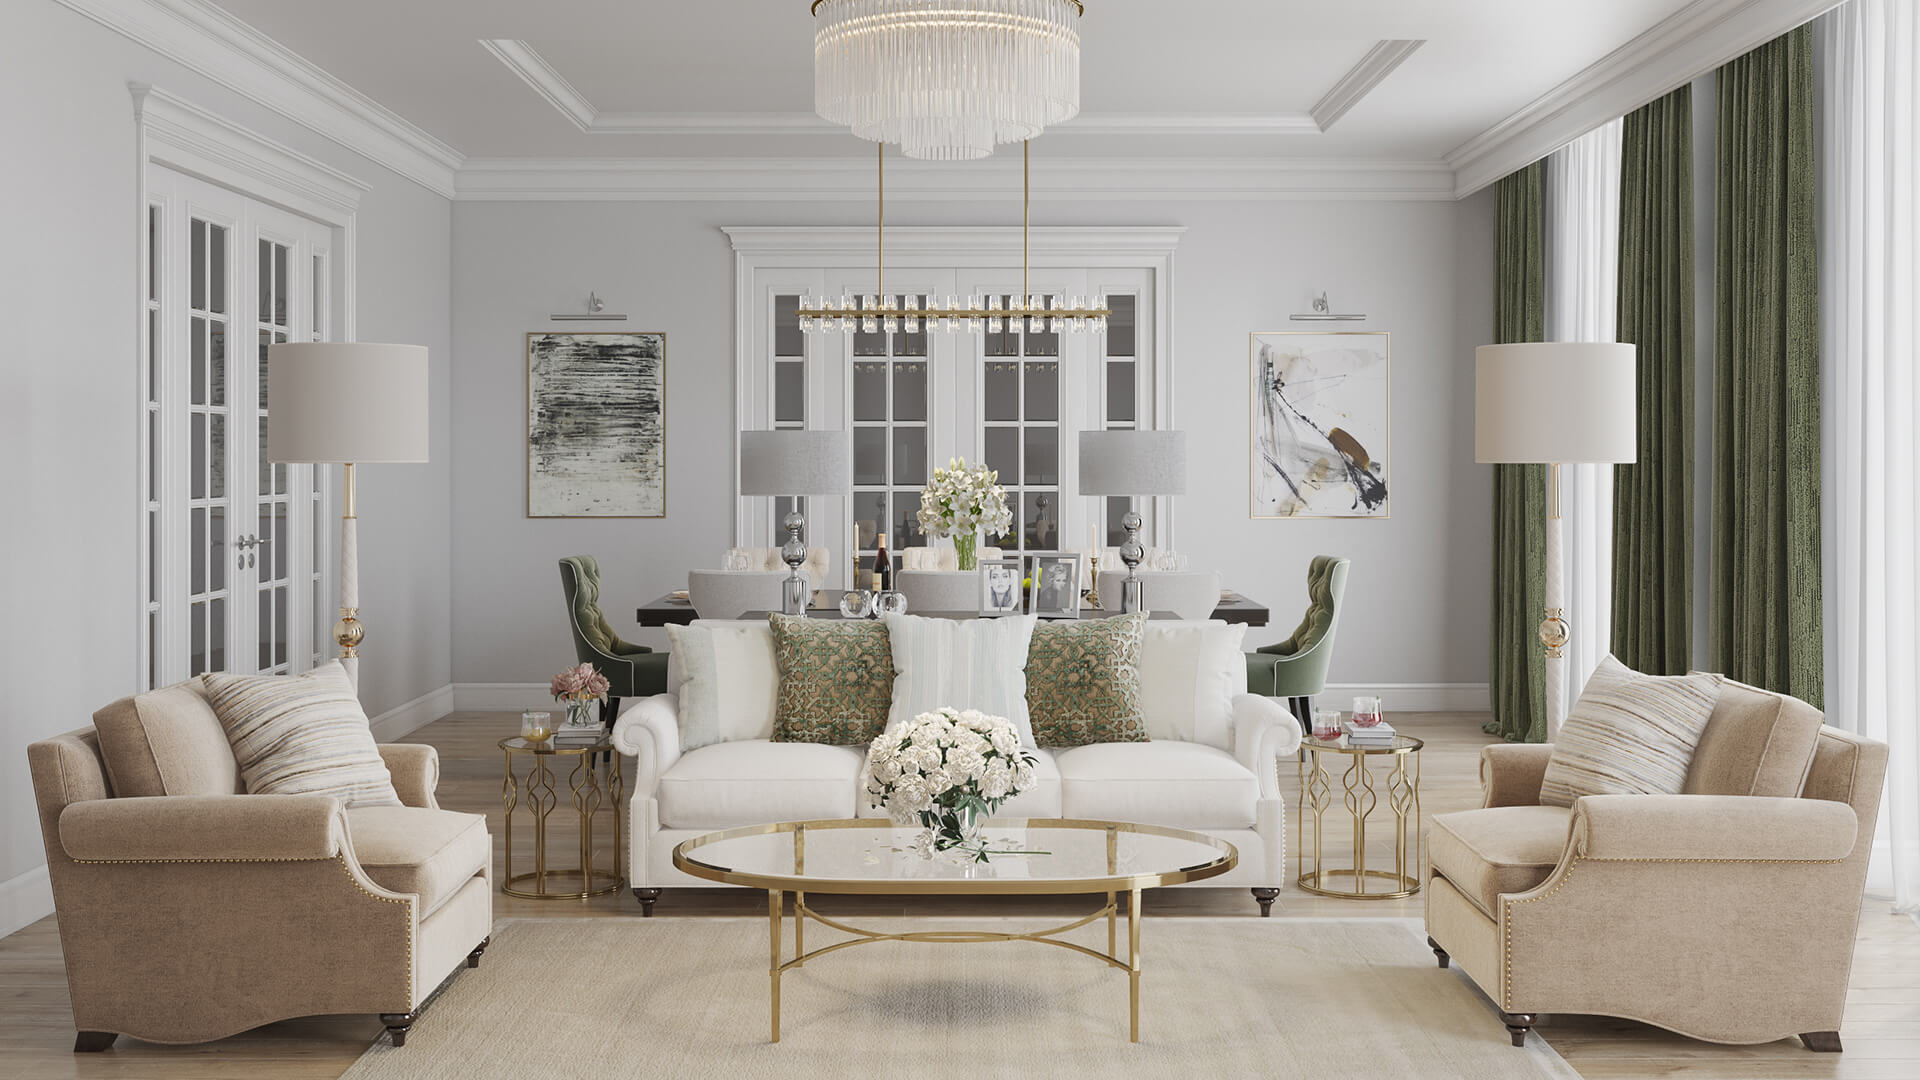 Beautiful Result of a 3D Interior Visualization Project